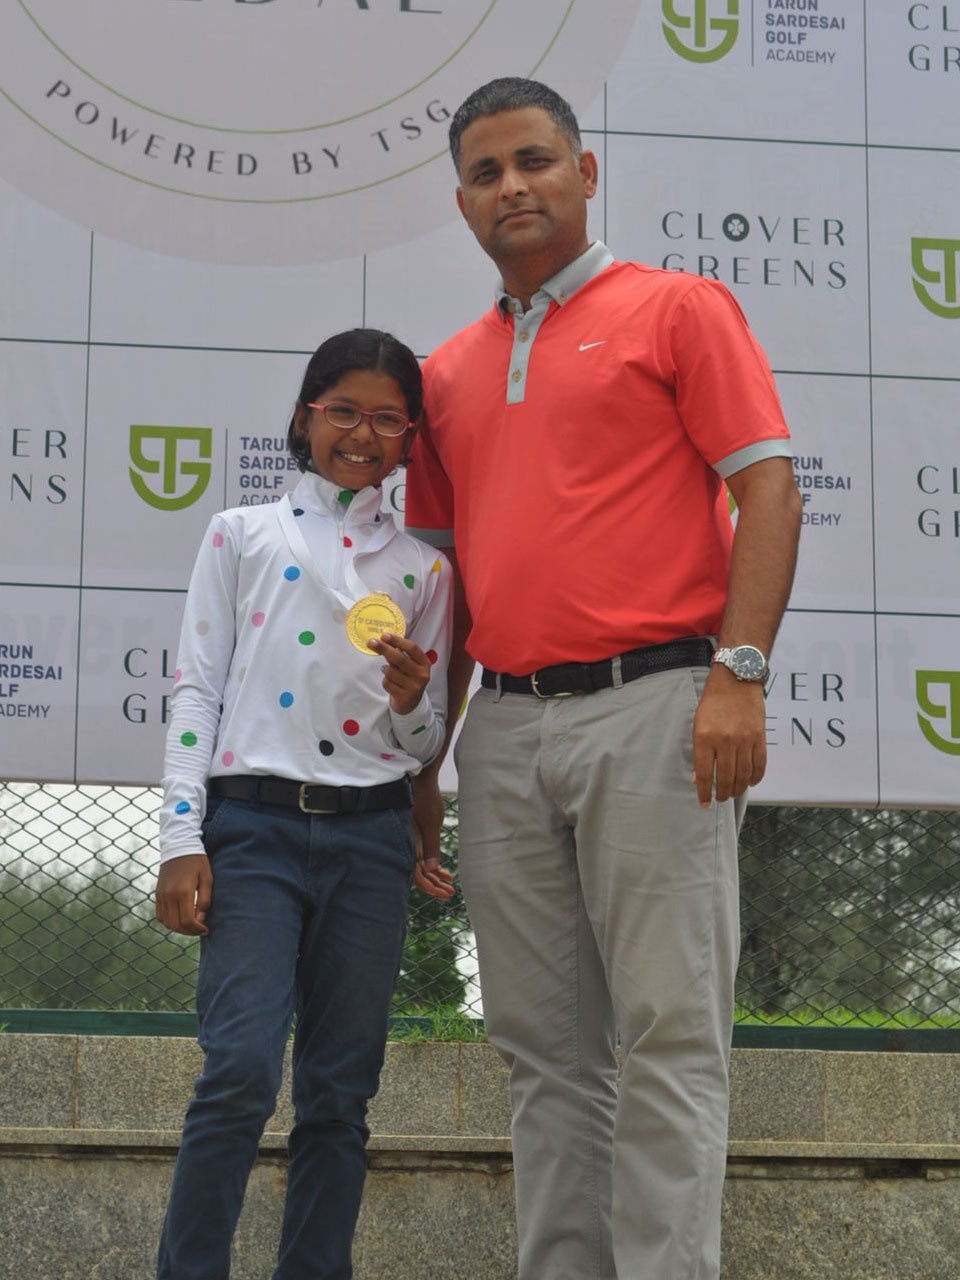 Myra Narsipur won the  'D' Girls category at the Clover Greens Junior Monthly Medal powered by TSG, held at Clover Greens Golf Course in Bangalore.